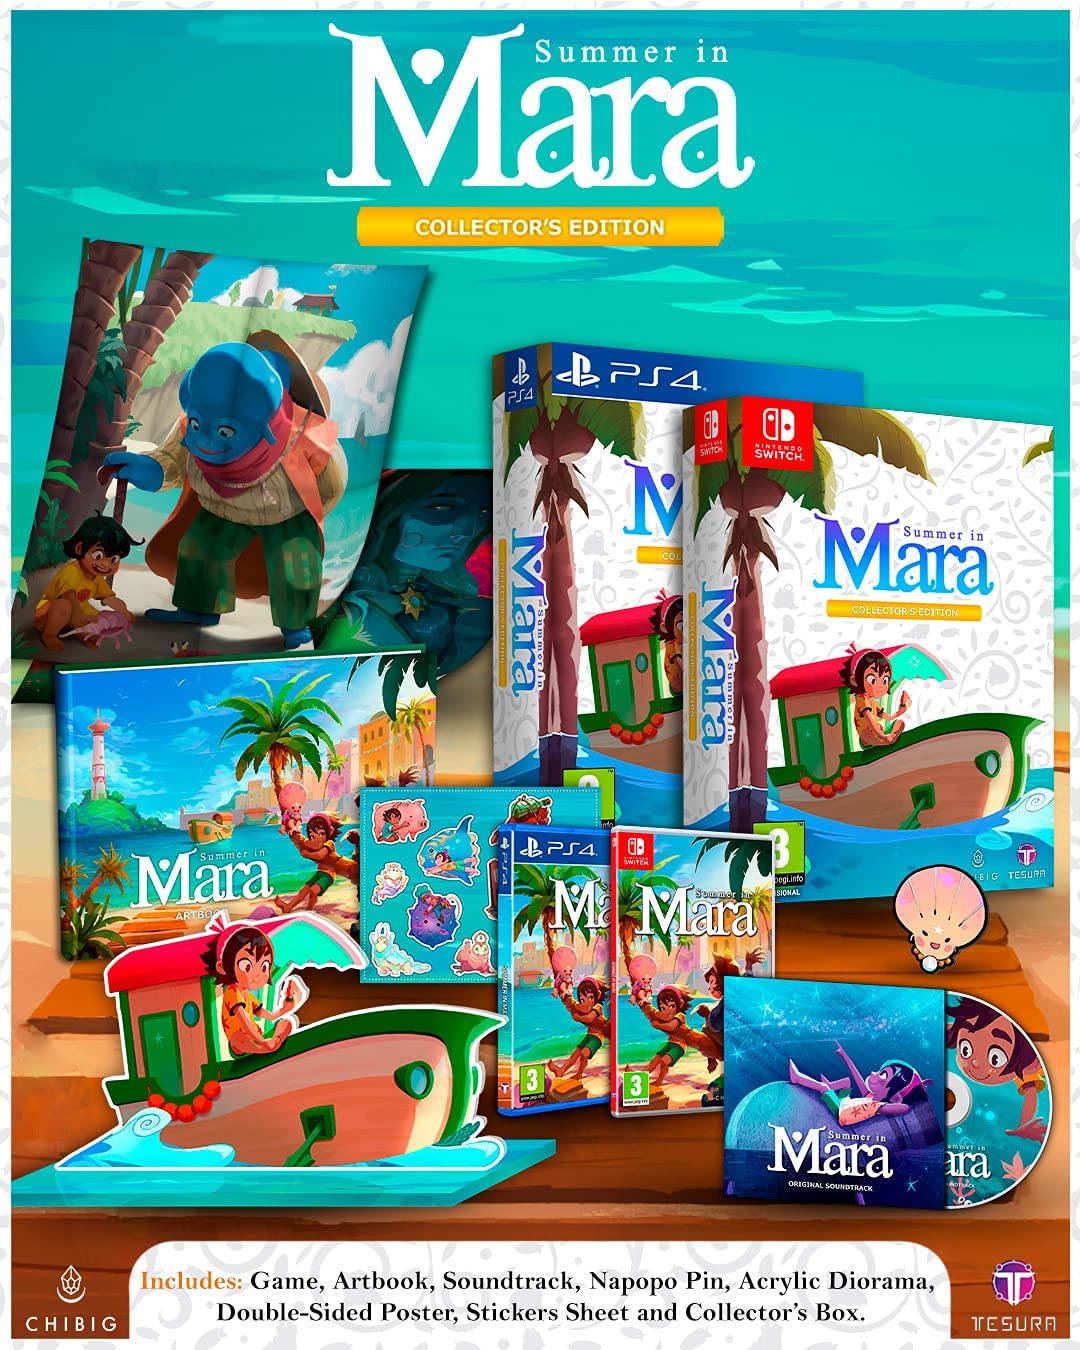 Summer in Mara Collector's Edition - Nintendo Switch